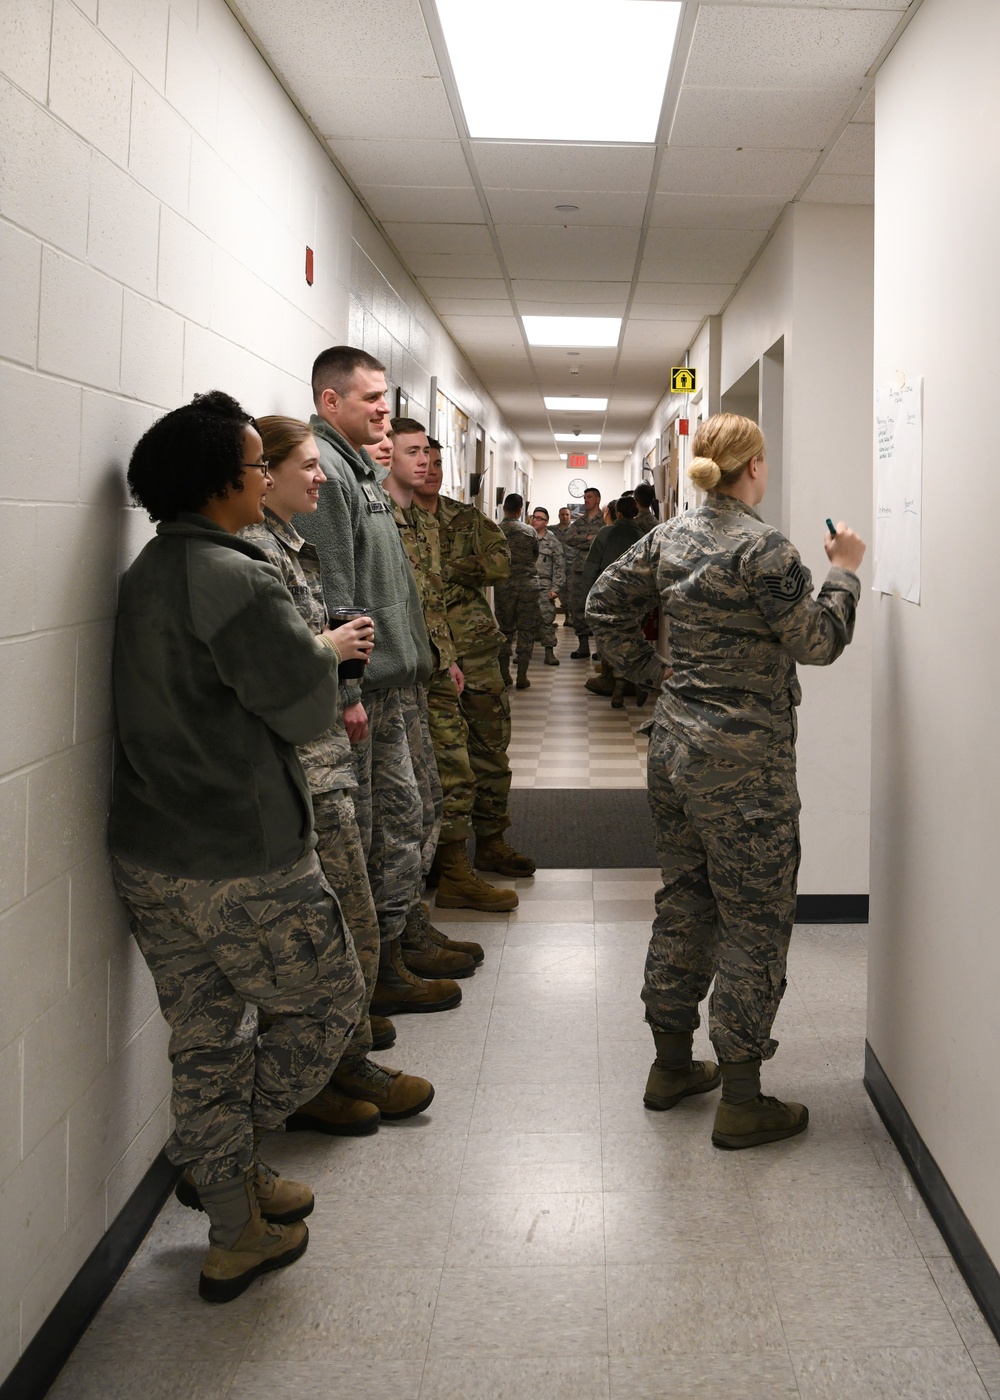 Dvids Images 104th Fighter Wing Holds Sexual Assault Prevention And Response Training [image